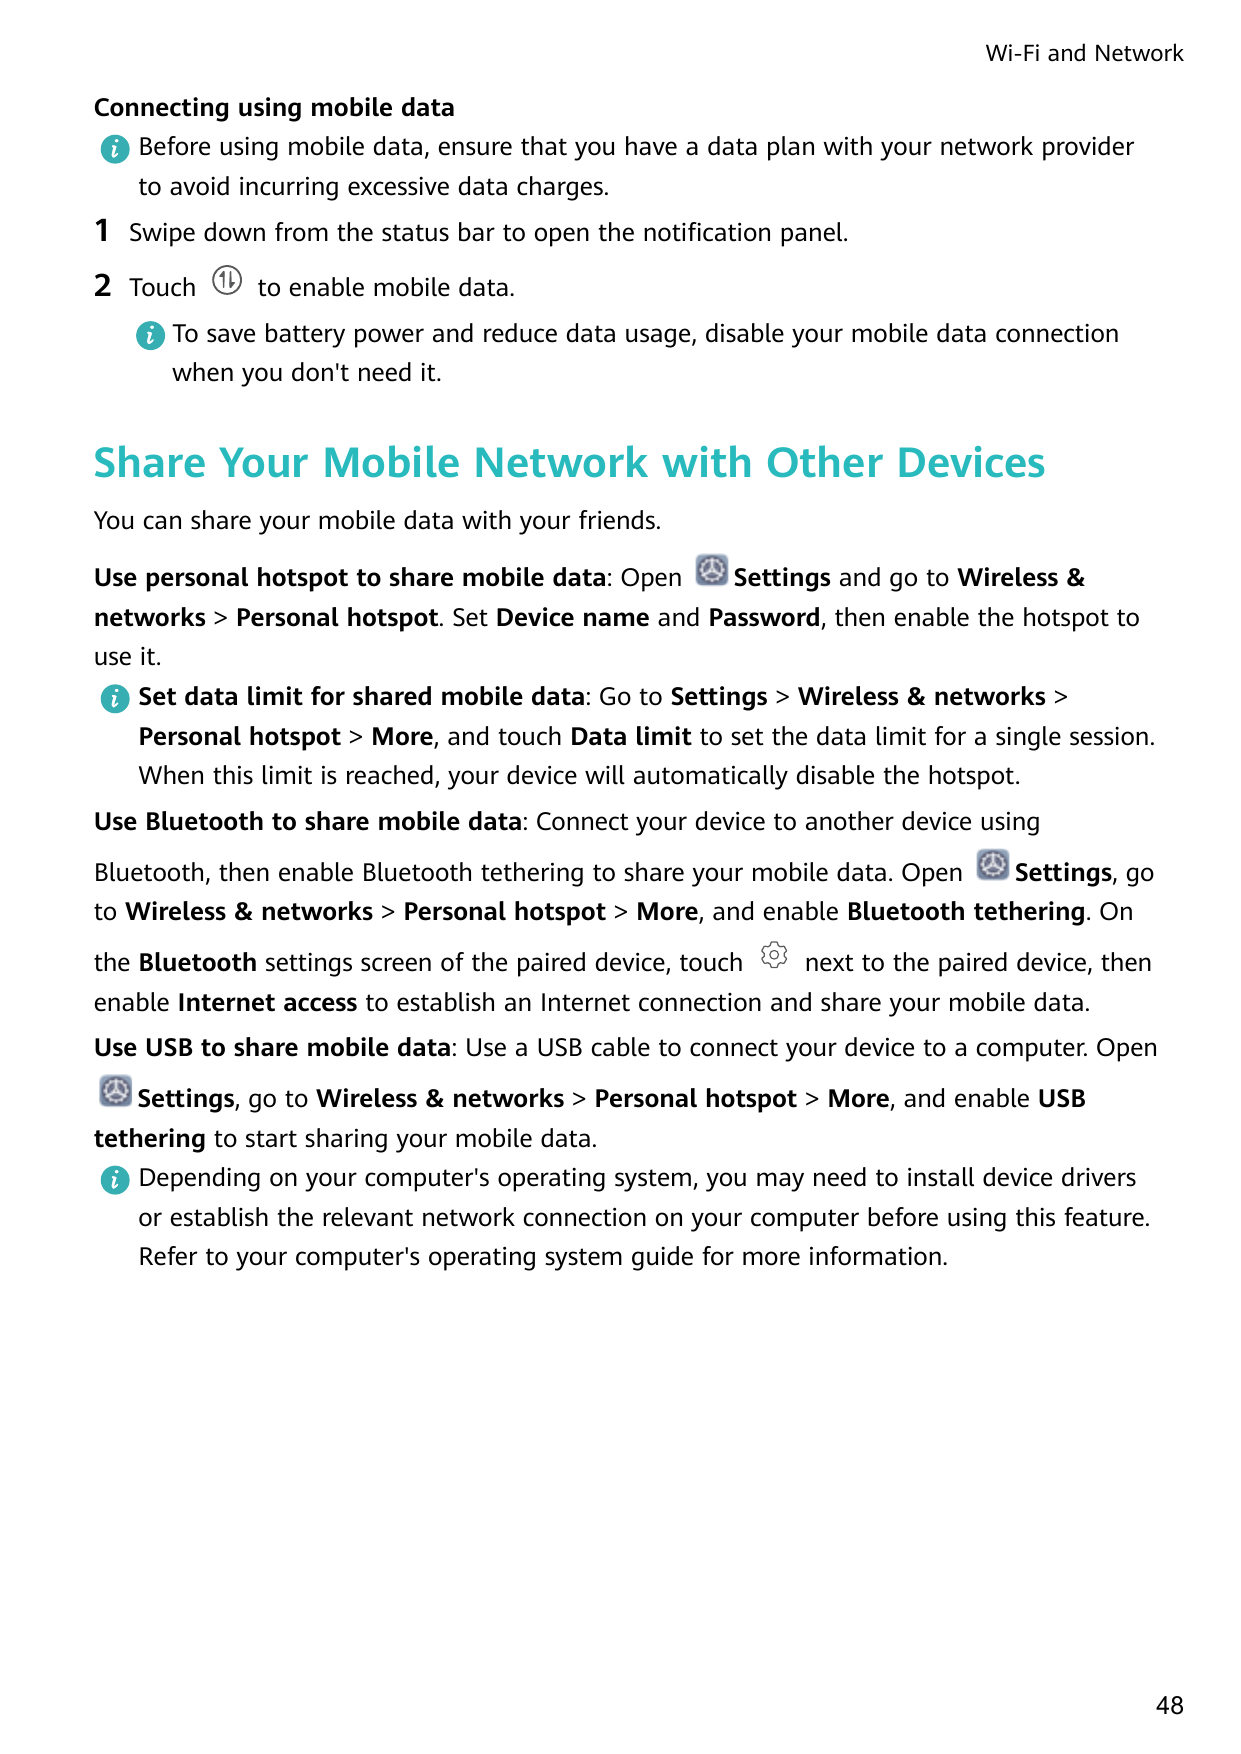 Wi-Fi and NetworkConnecting using mobile dataBefore using mobile data, ensure that you have a data plan with your network provid